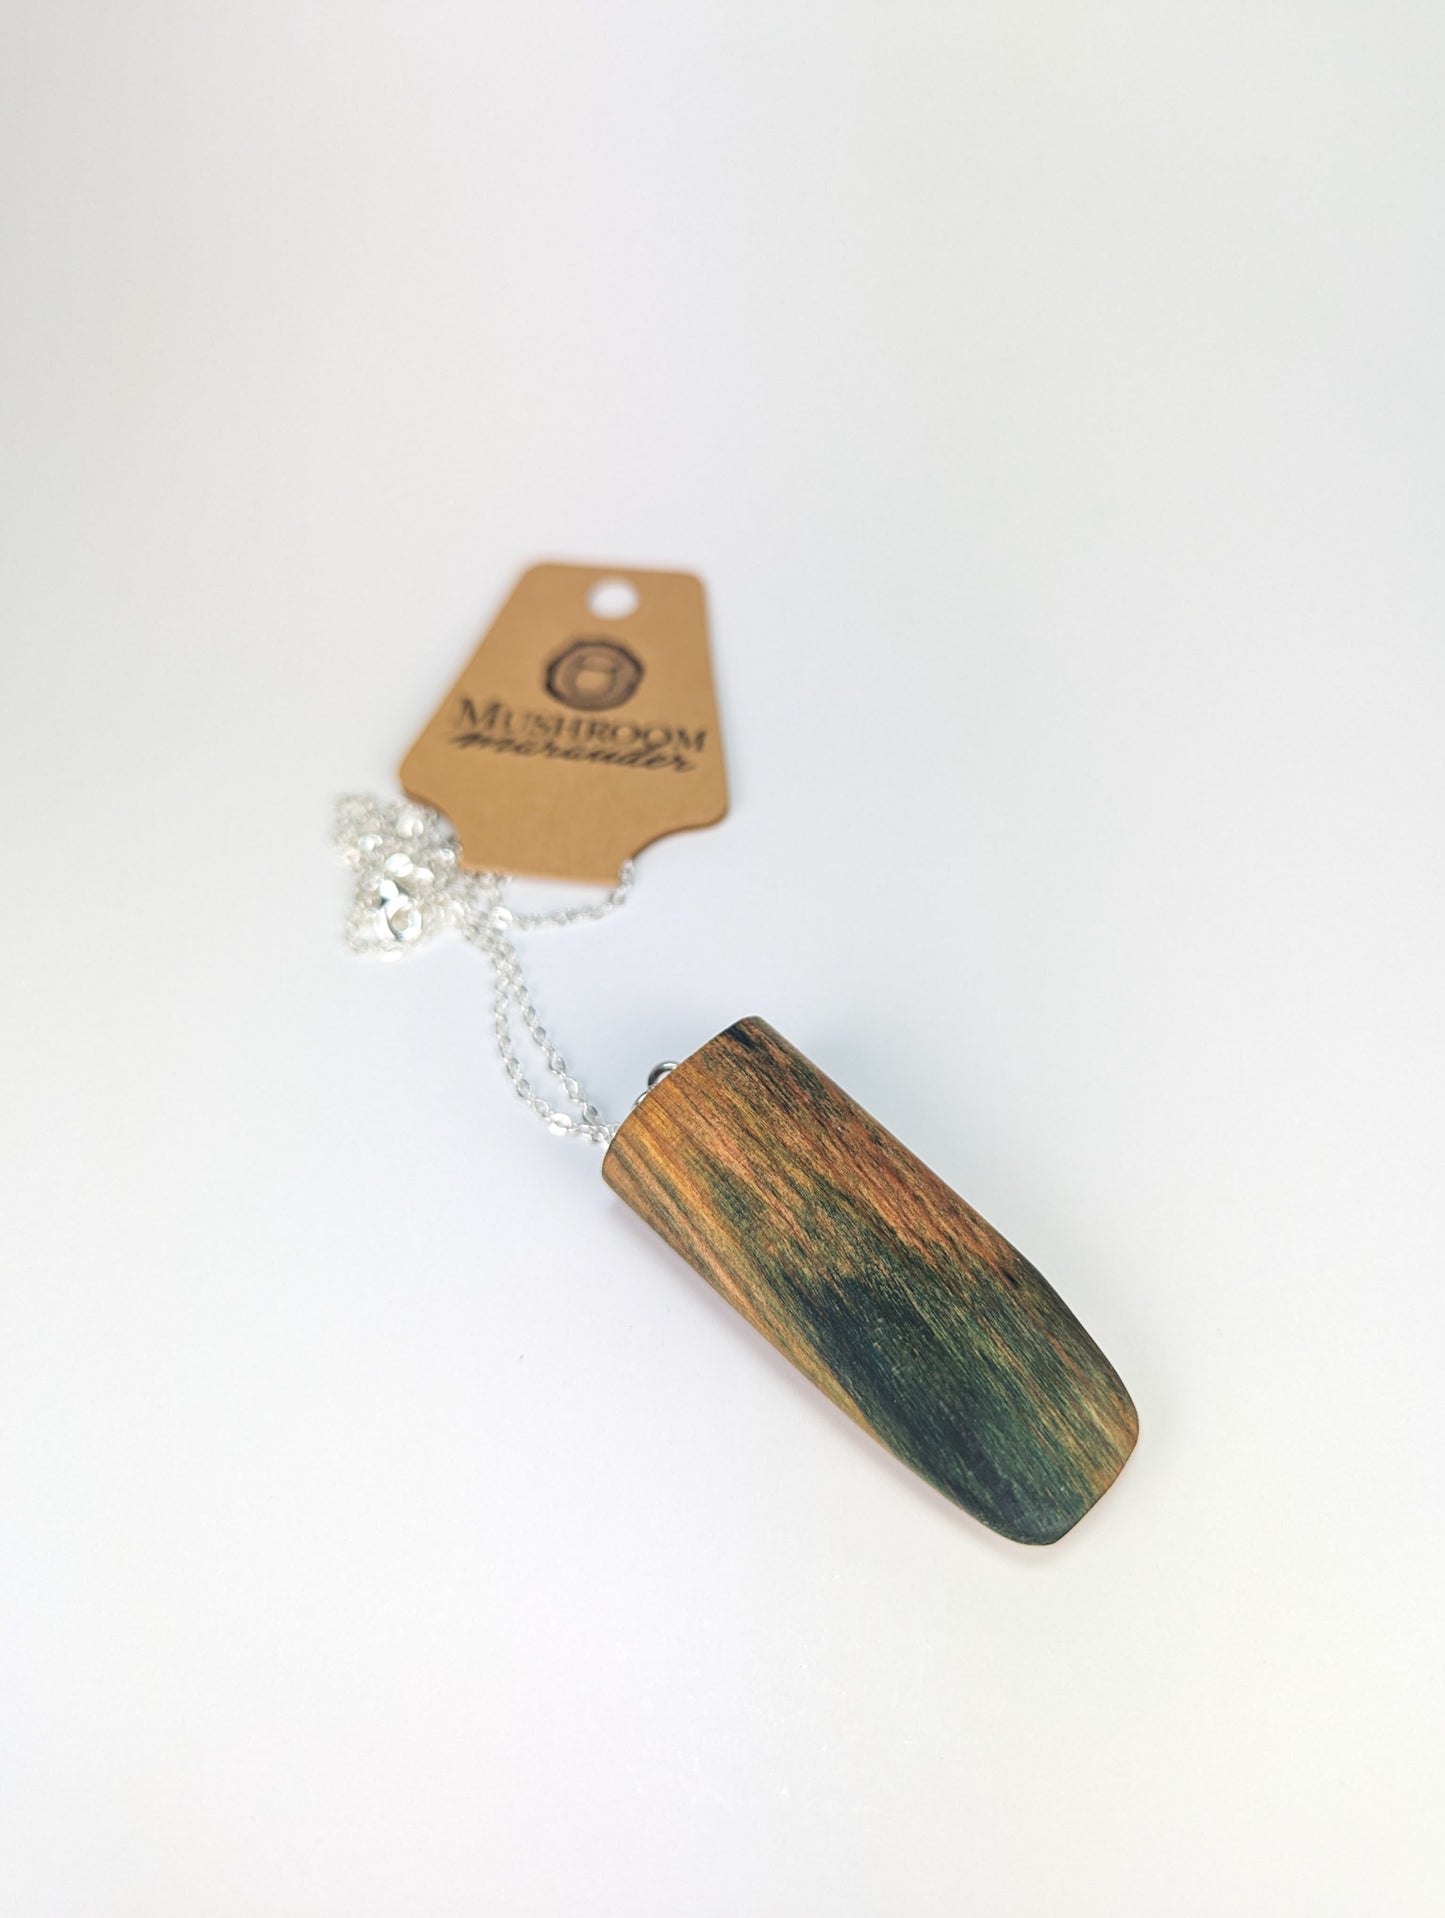 Naturally Fungus-Stained Wooden Pendant | Pointed Slab